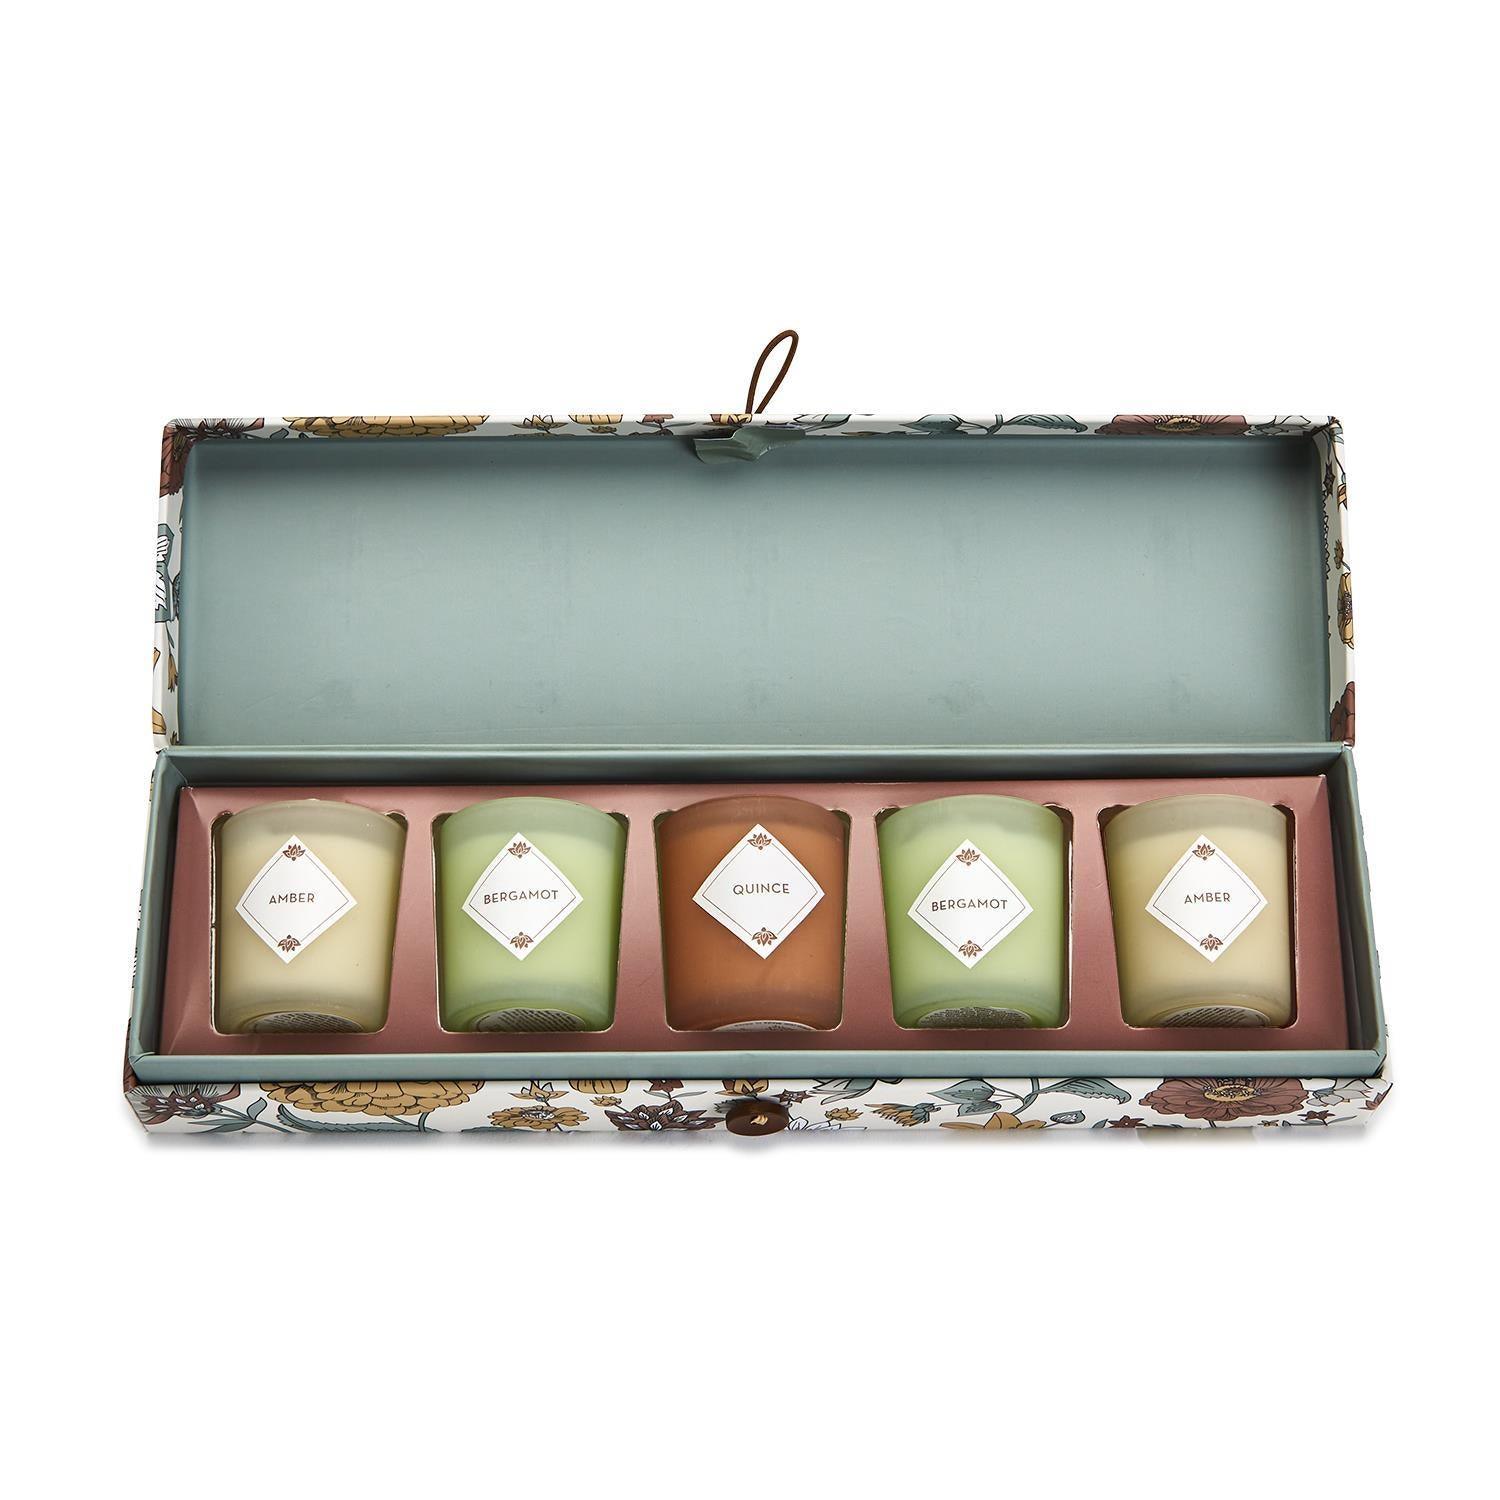 Nature Walk Set of 5 Scented Candles in Gift Box - Elegant Linen